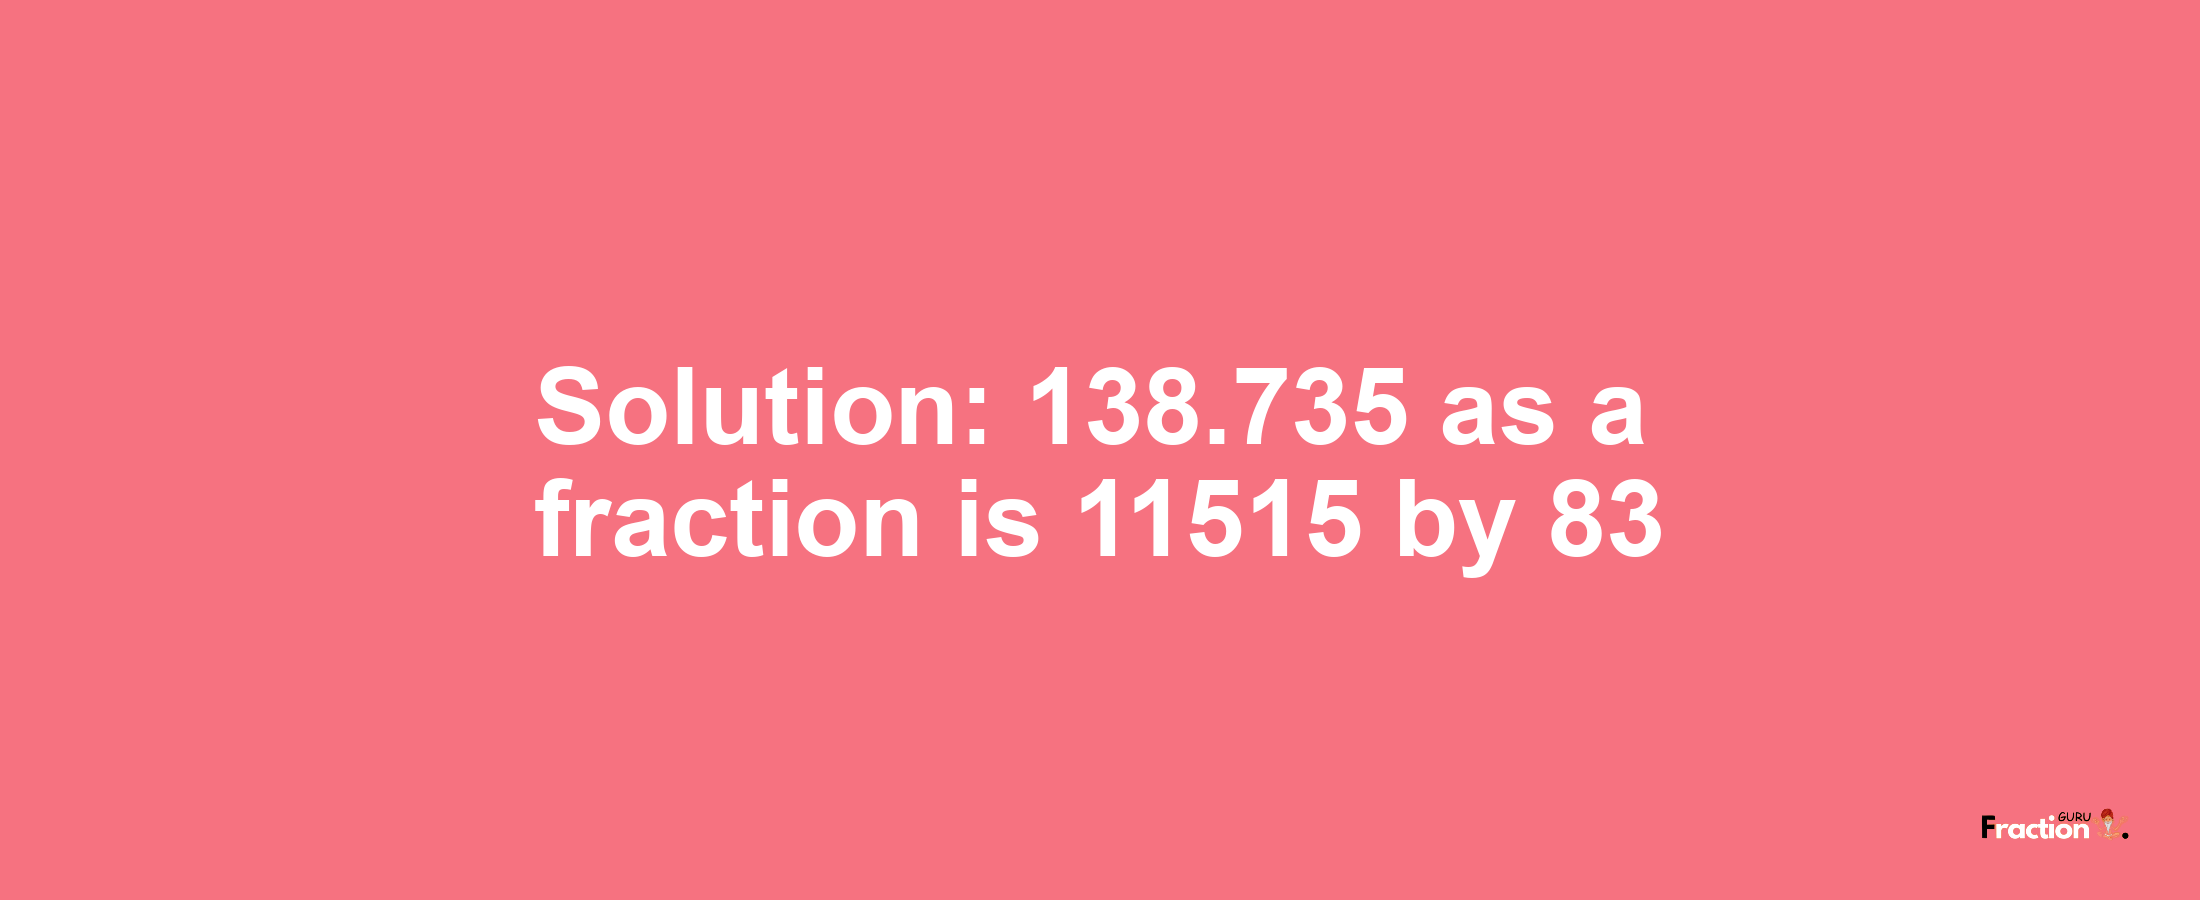 Solution:138.735 as a fraction is 11515/83